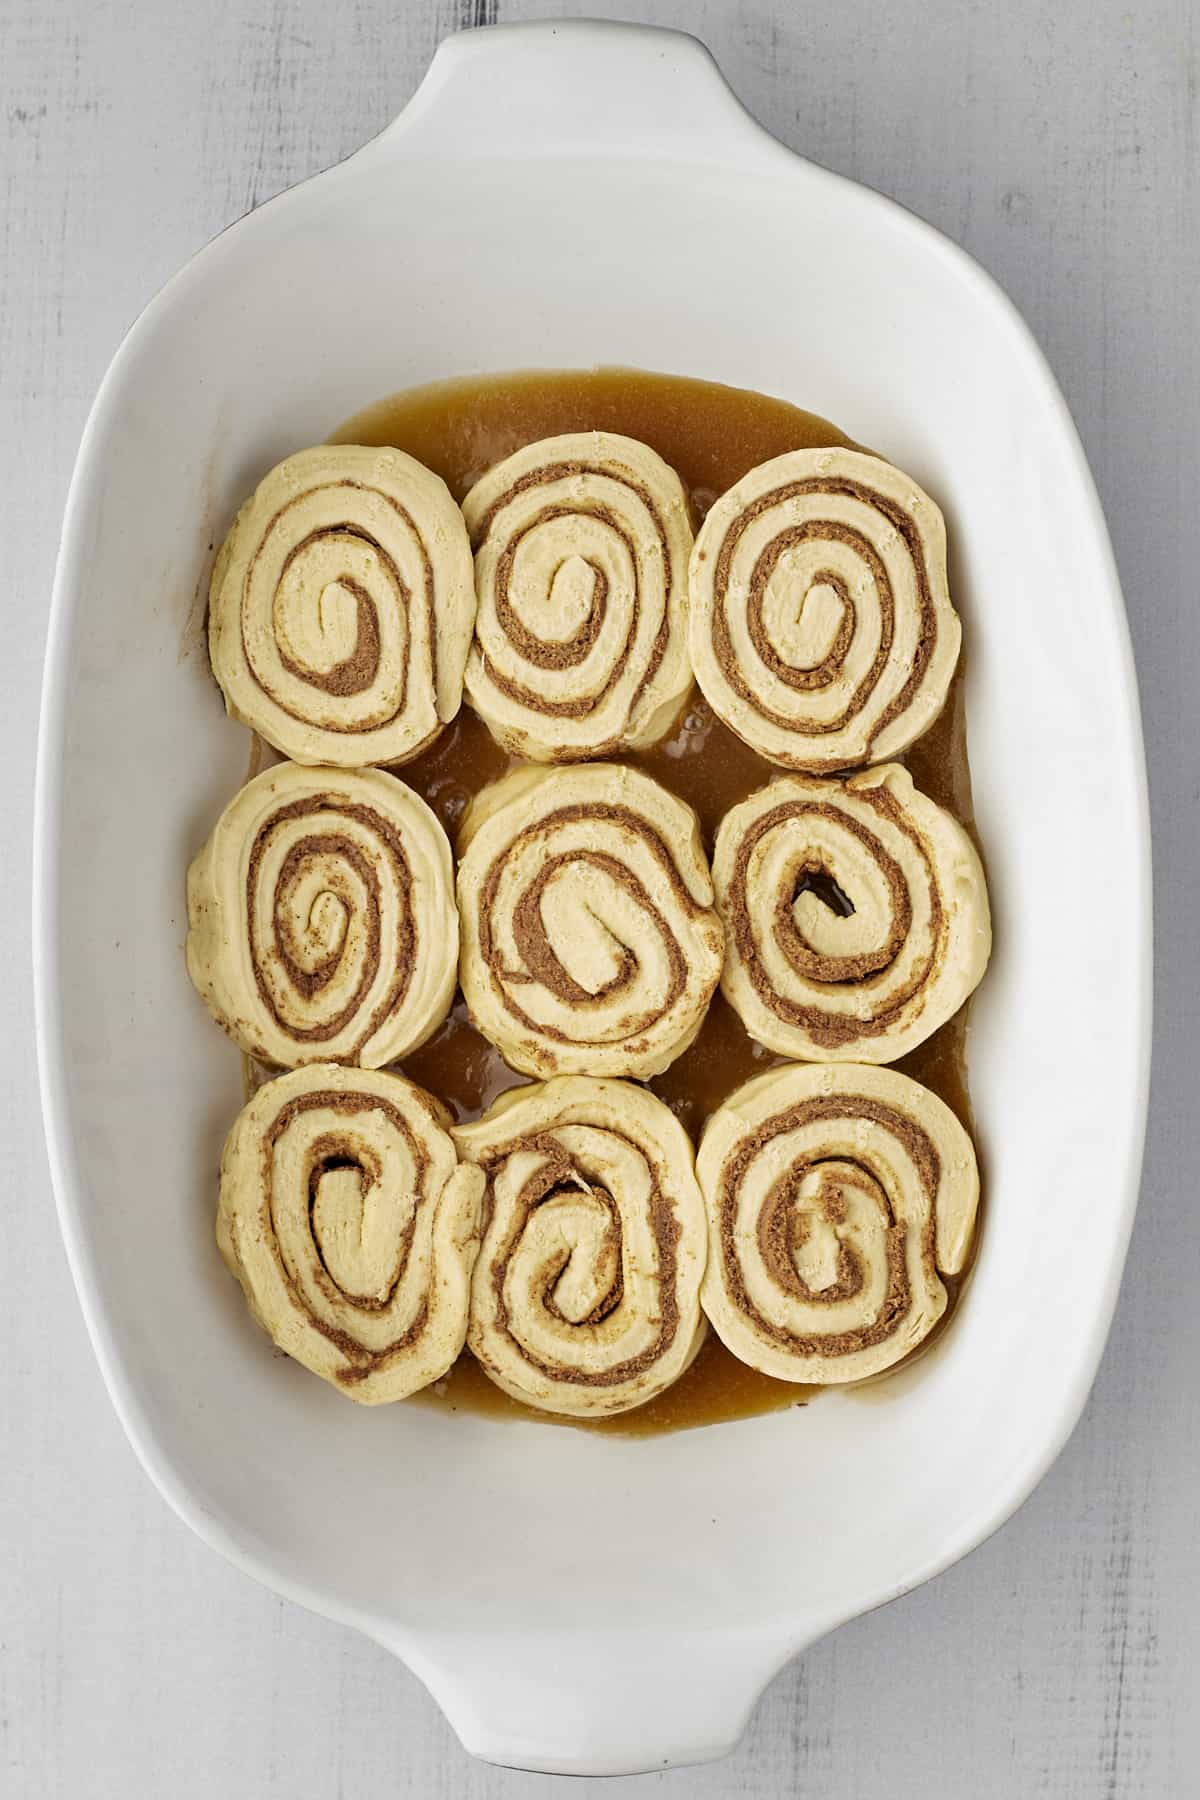 unbaked cinnamon rolls on top of caramel sauce in a white baking dish